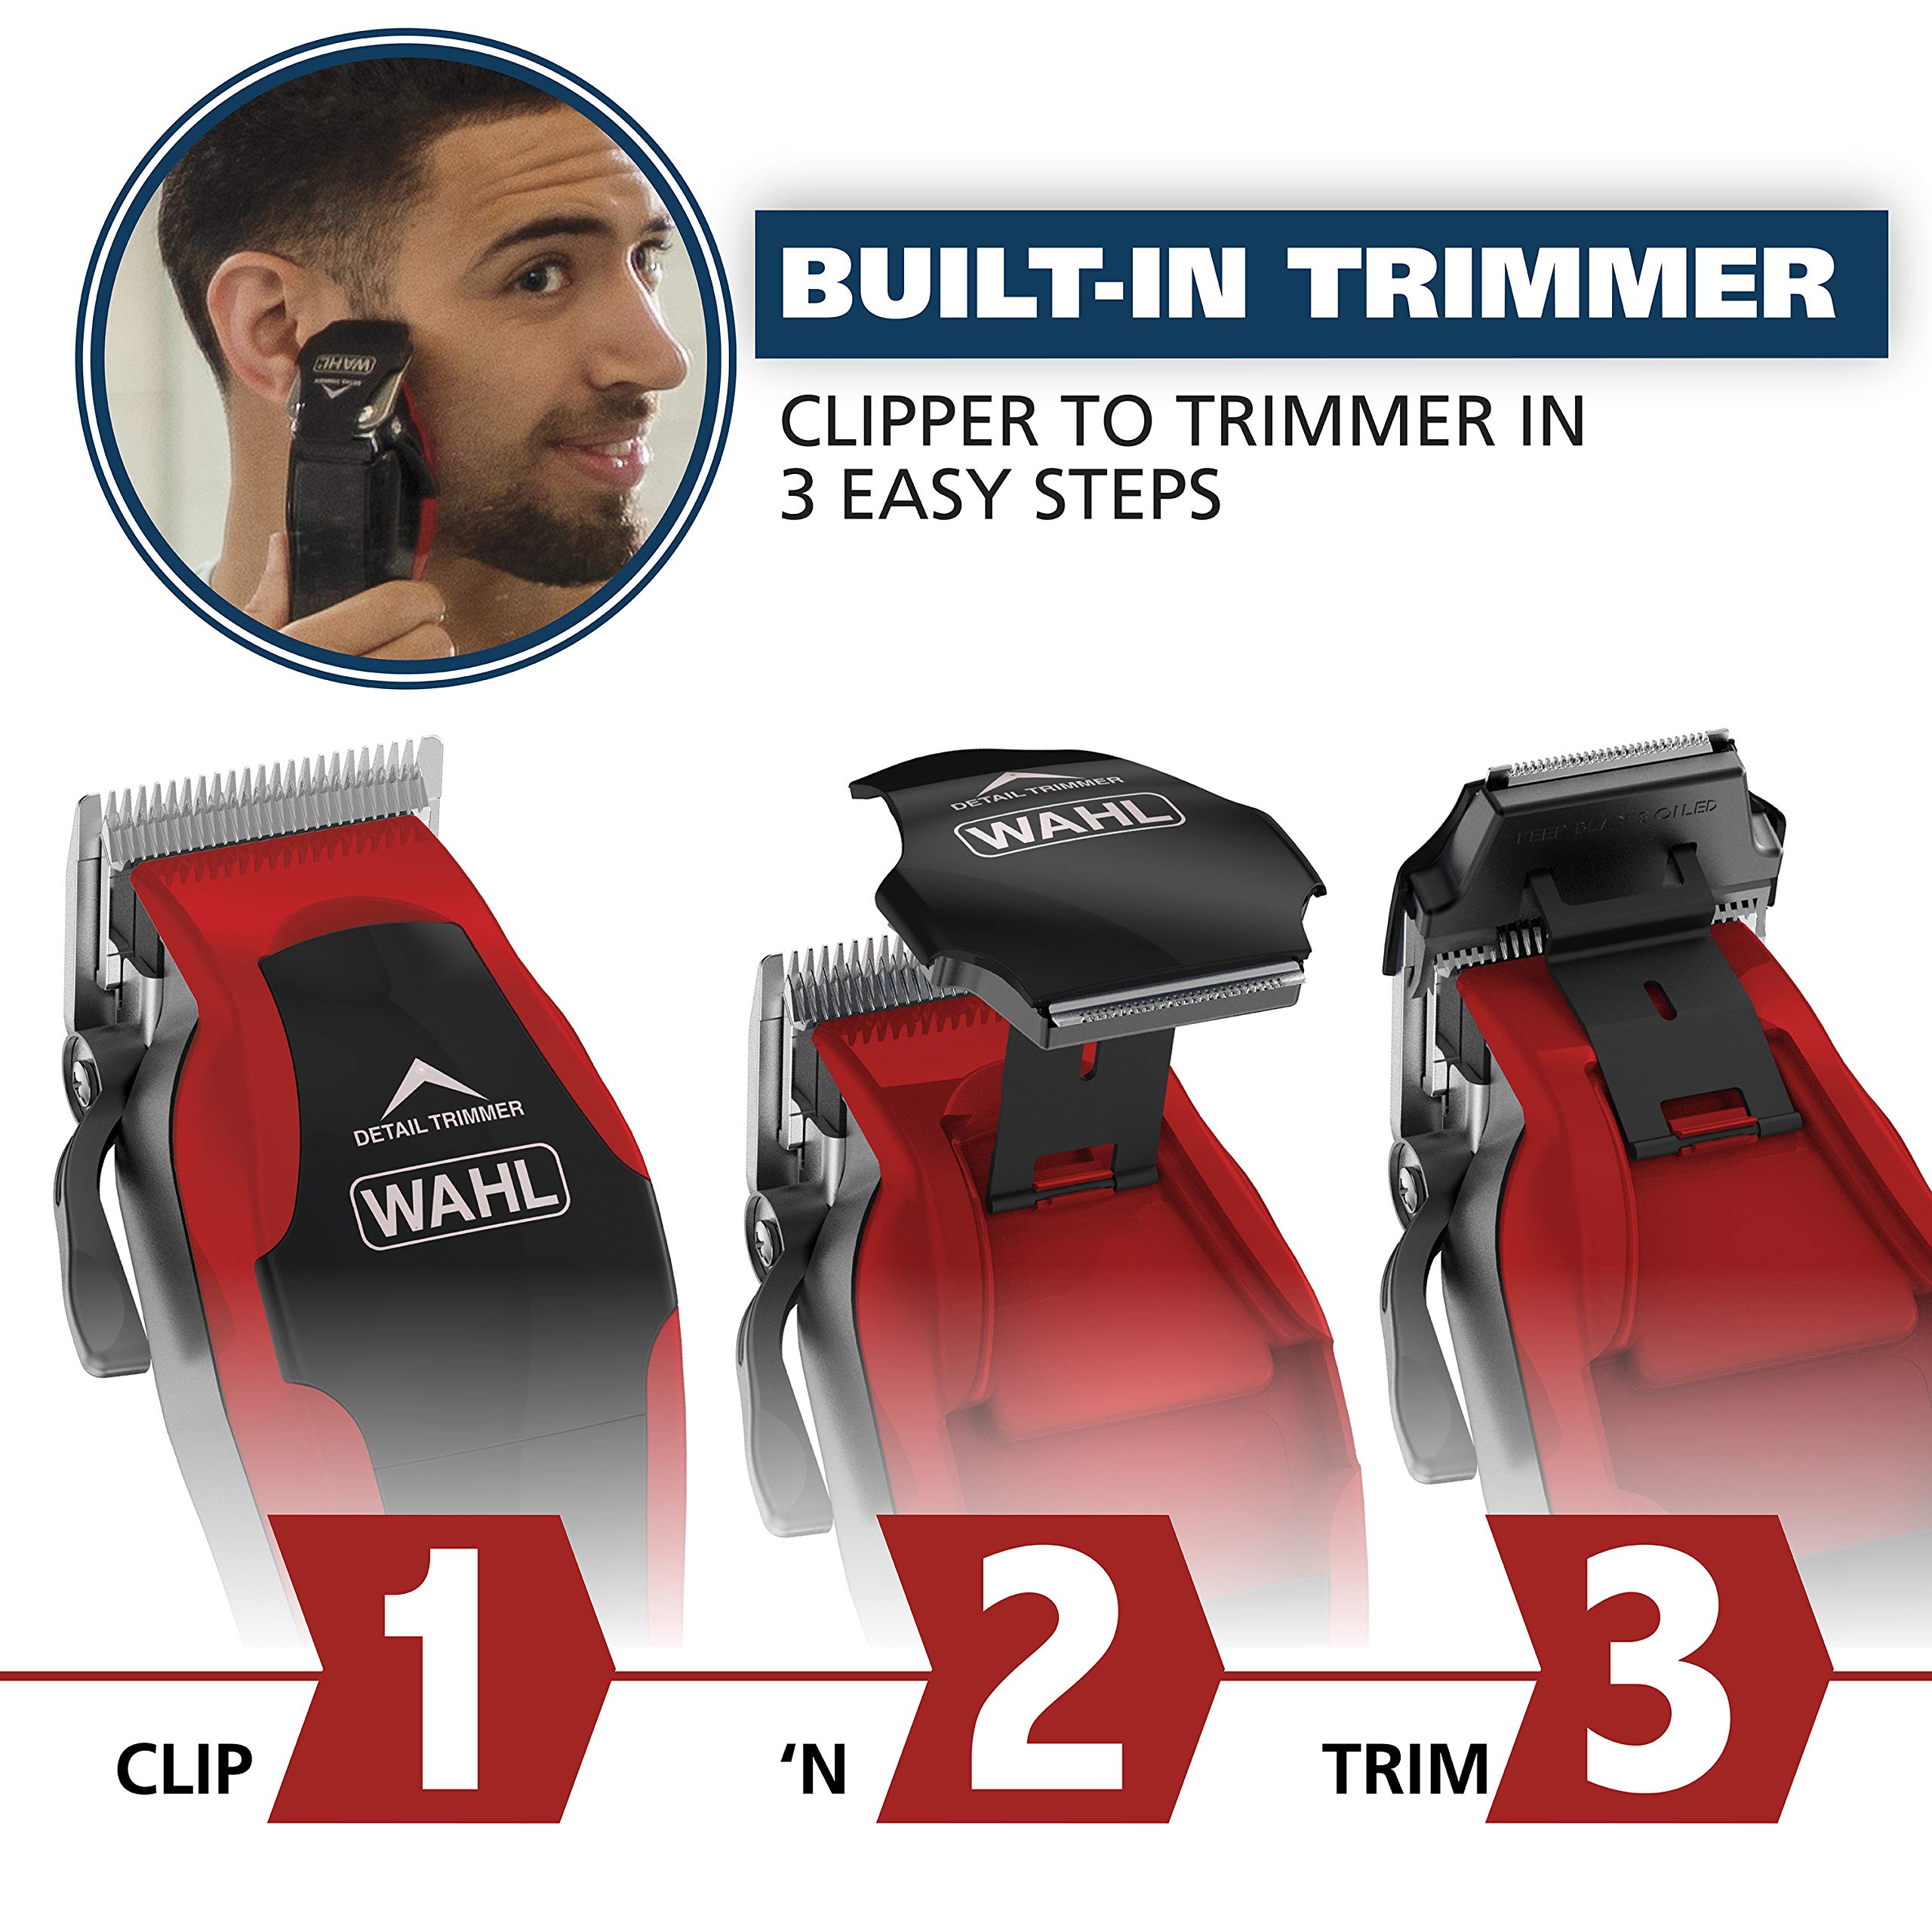 Wahl USA Clip ‘N Trim 2 In 1 Corded Hair Clipper with Pop Up Trimmer Kit, Perfect for Home Haircuts and Touching Up Around Necklines and Sideburns – Model 79900-1501P